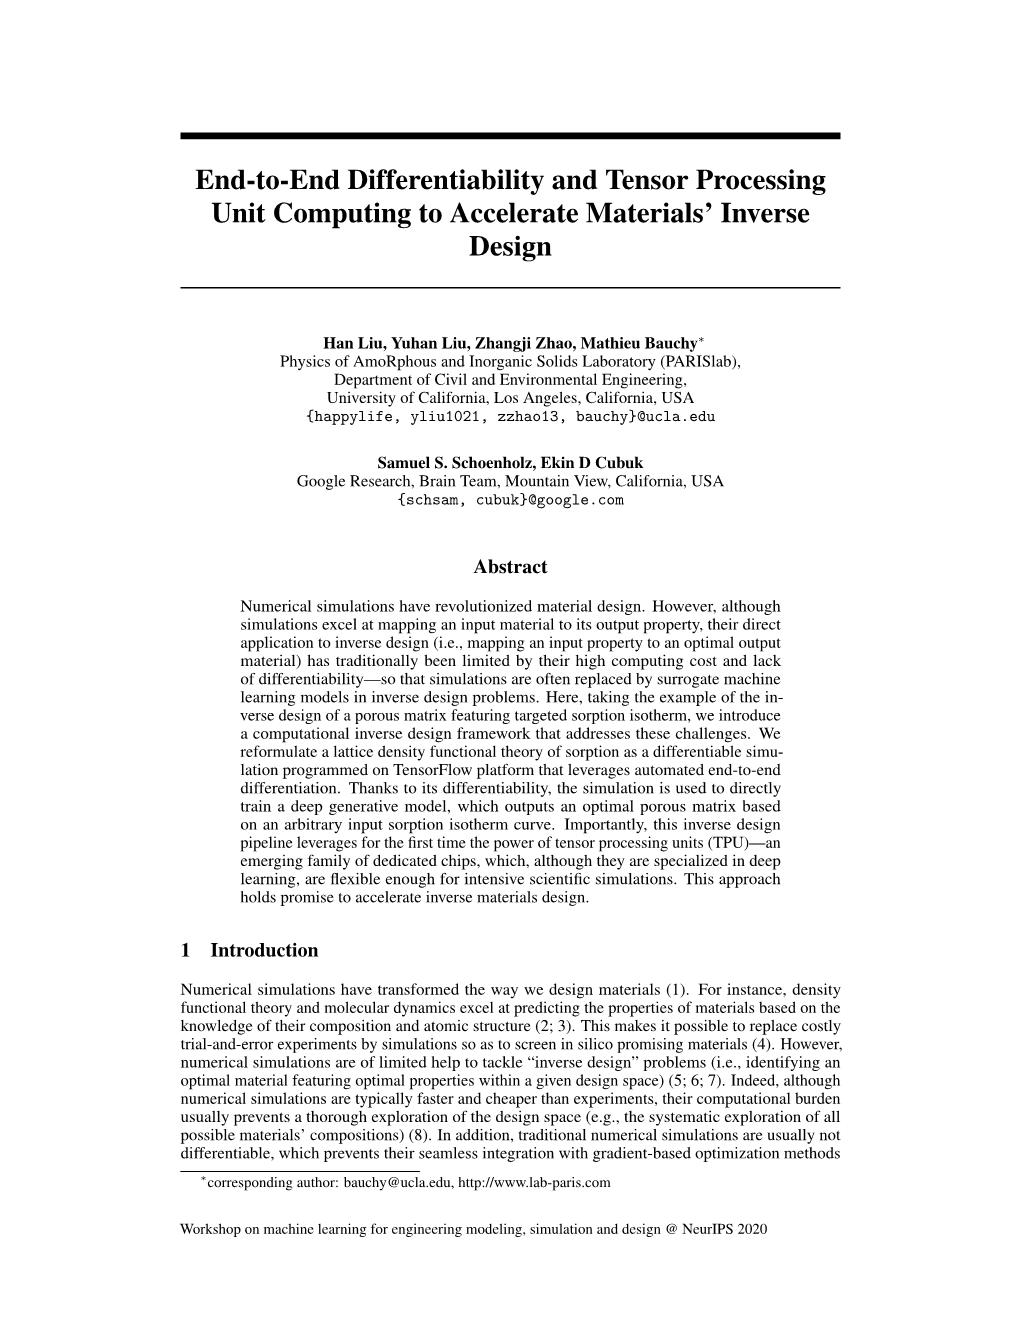 End-To-End Differentiability and Tensor Processing Unit Computing to Accelerate Materials’ Inverse Design